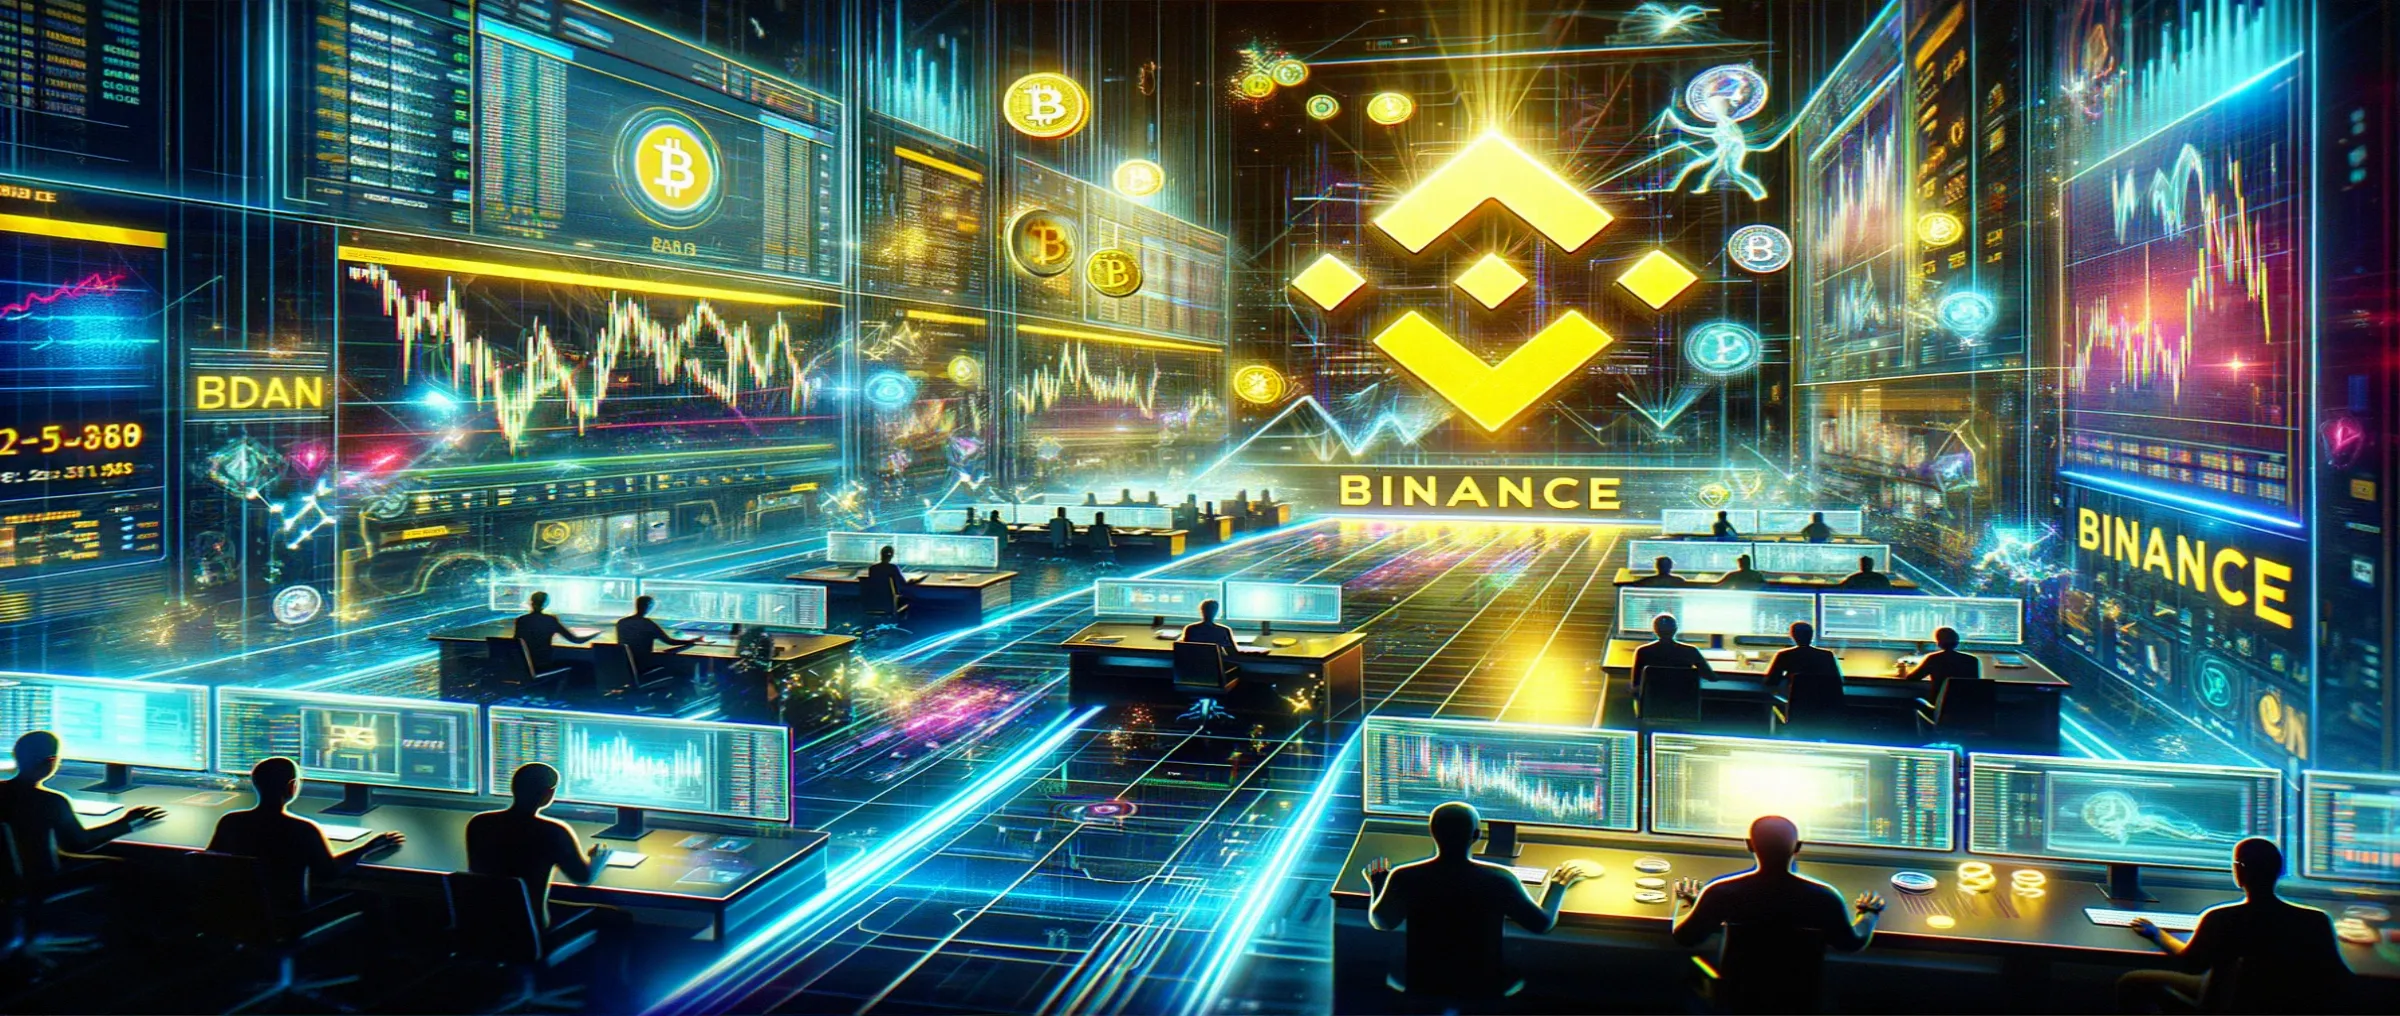 Binance Exchange has attracted a record $4.6 billion in customer funds in two months